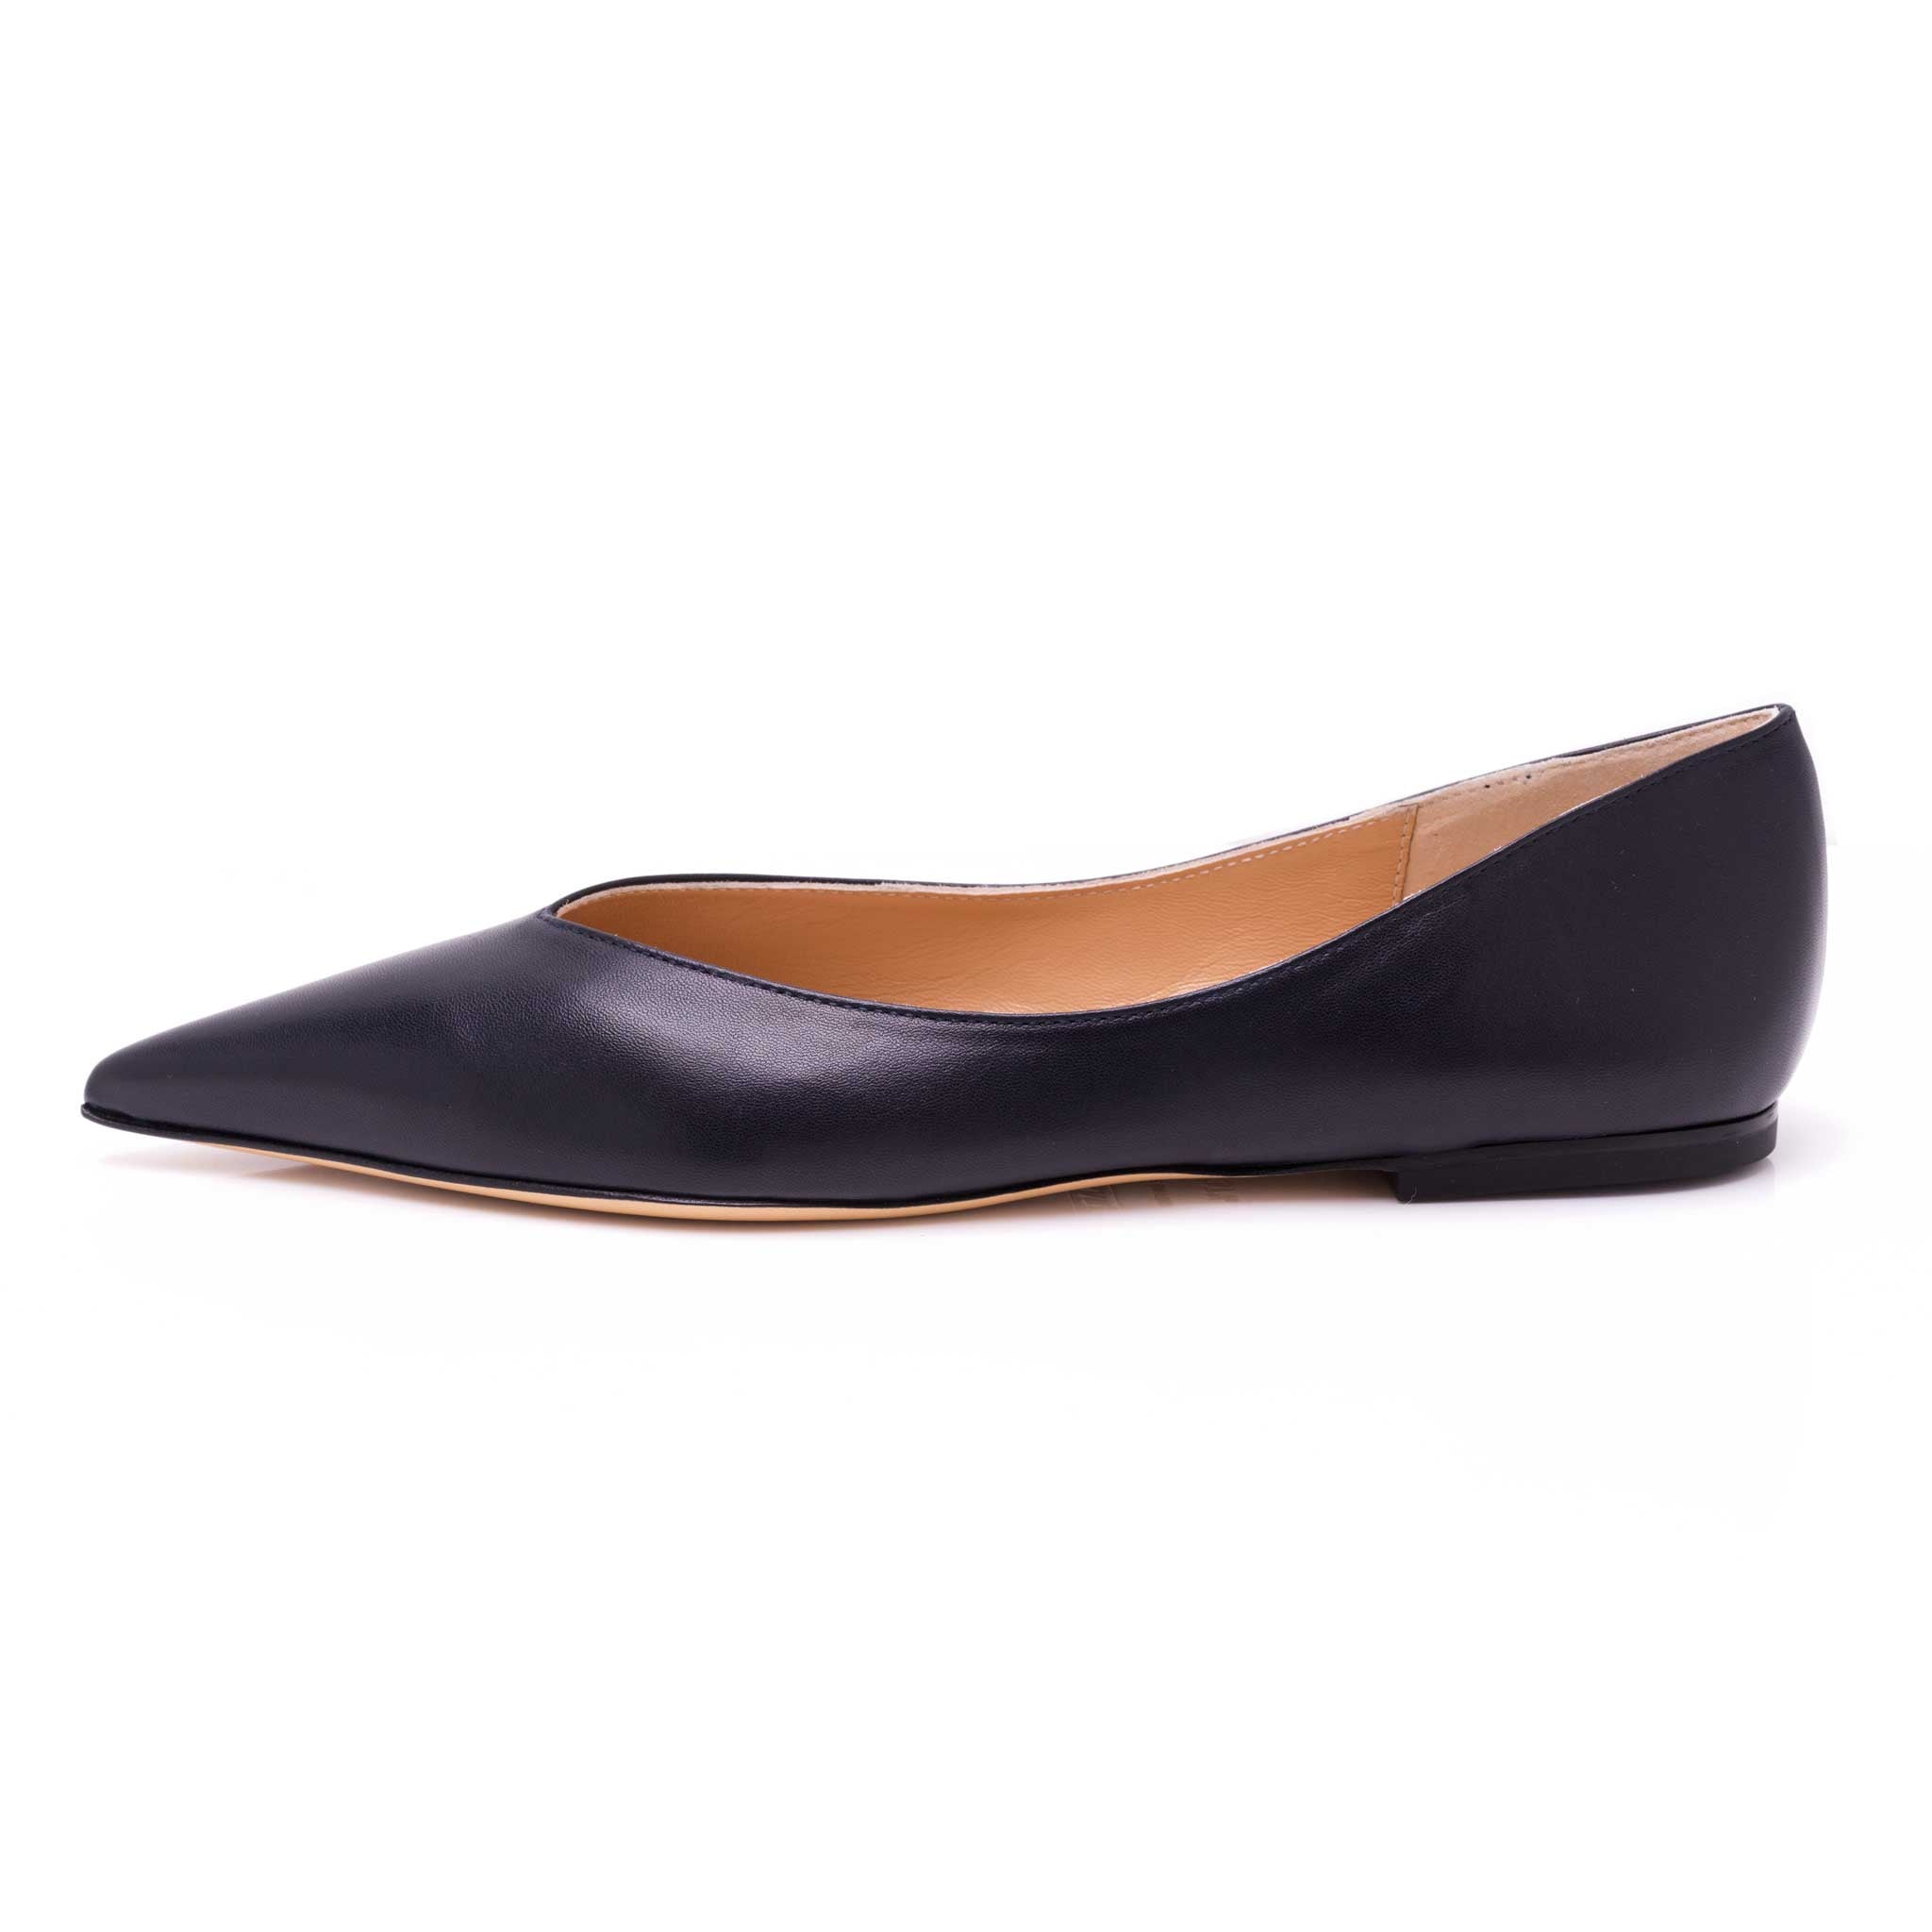 very pointed toe flat slip on shoes for women in a soft buttery leather dark navy color